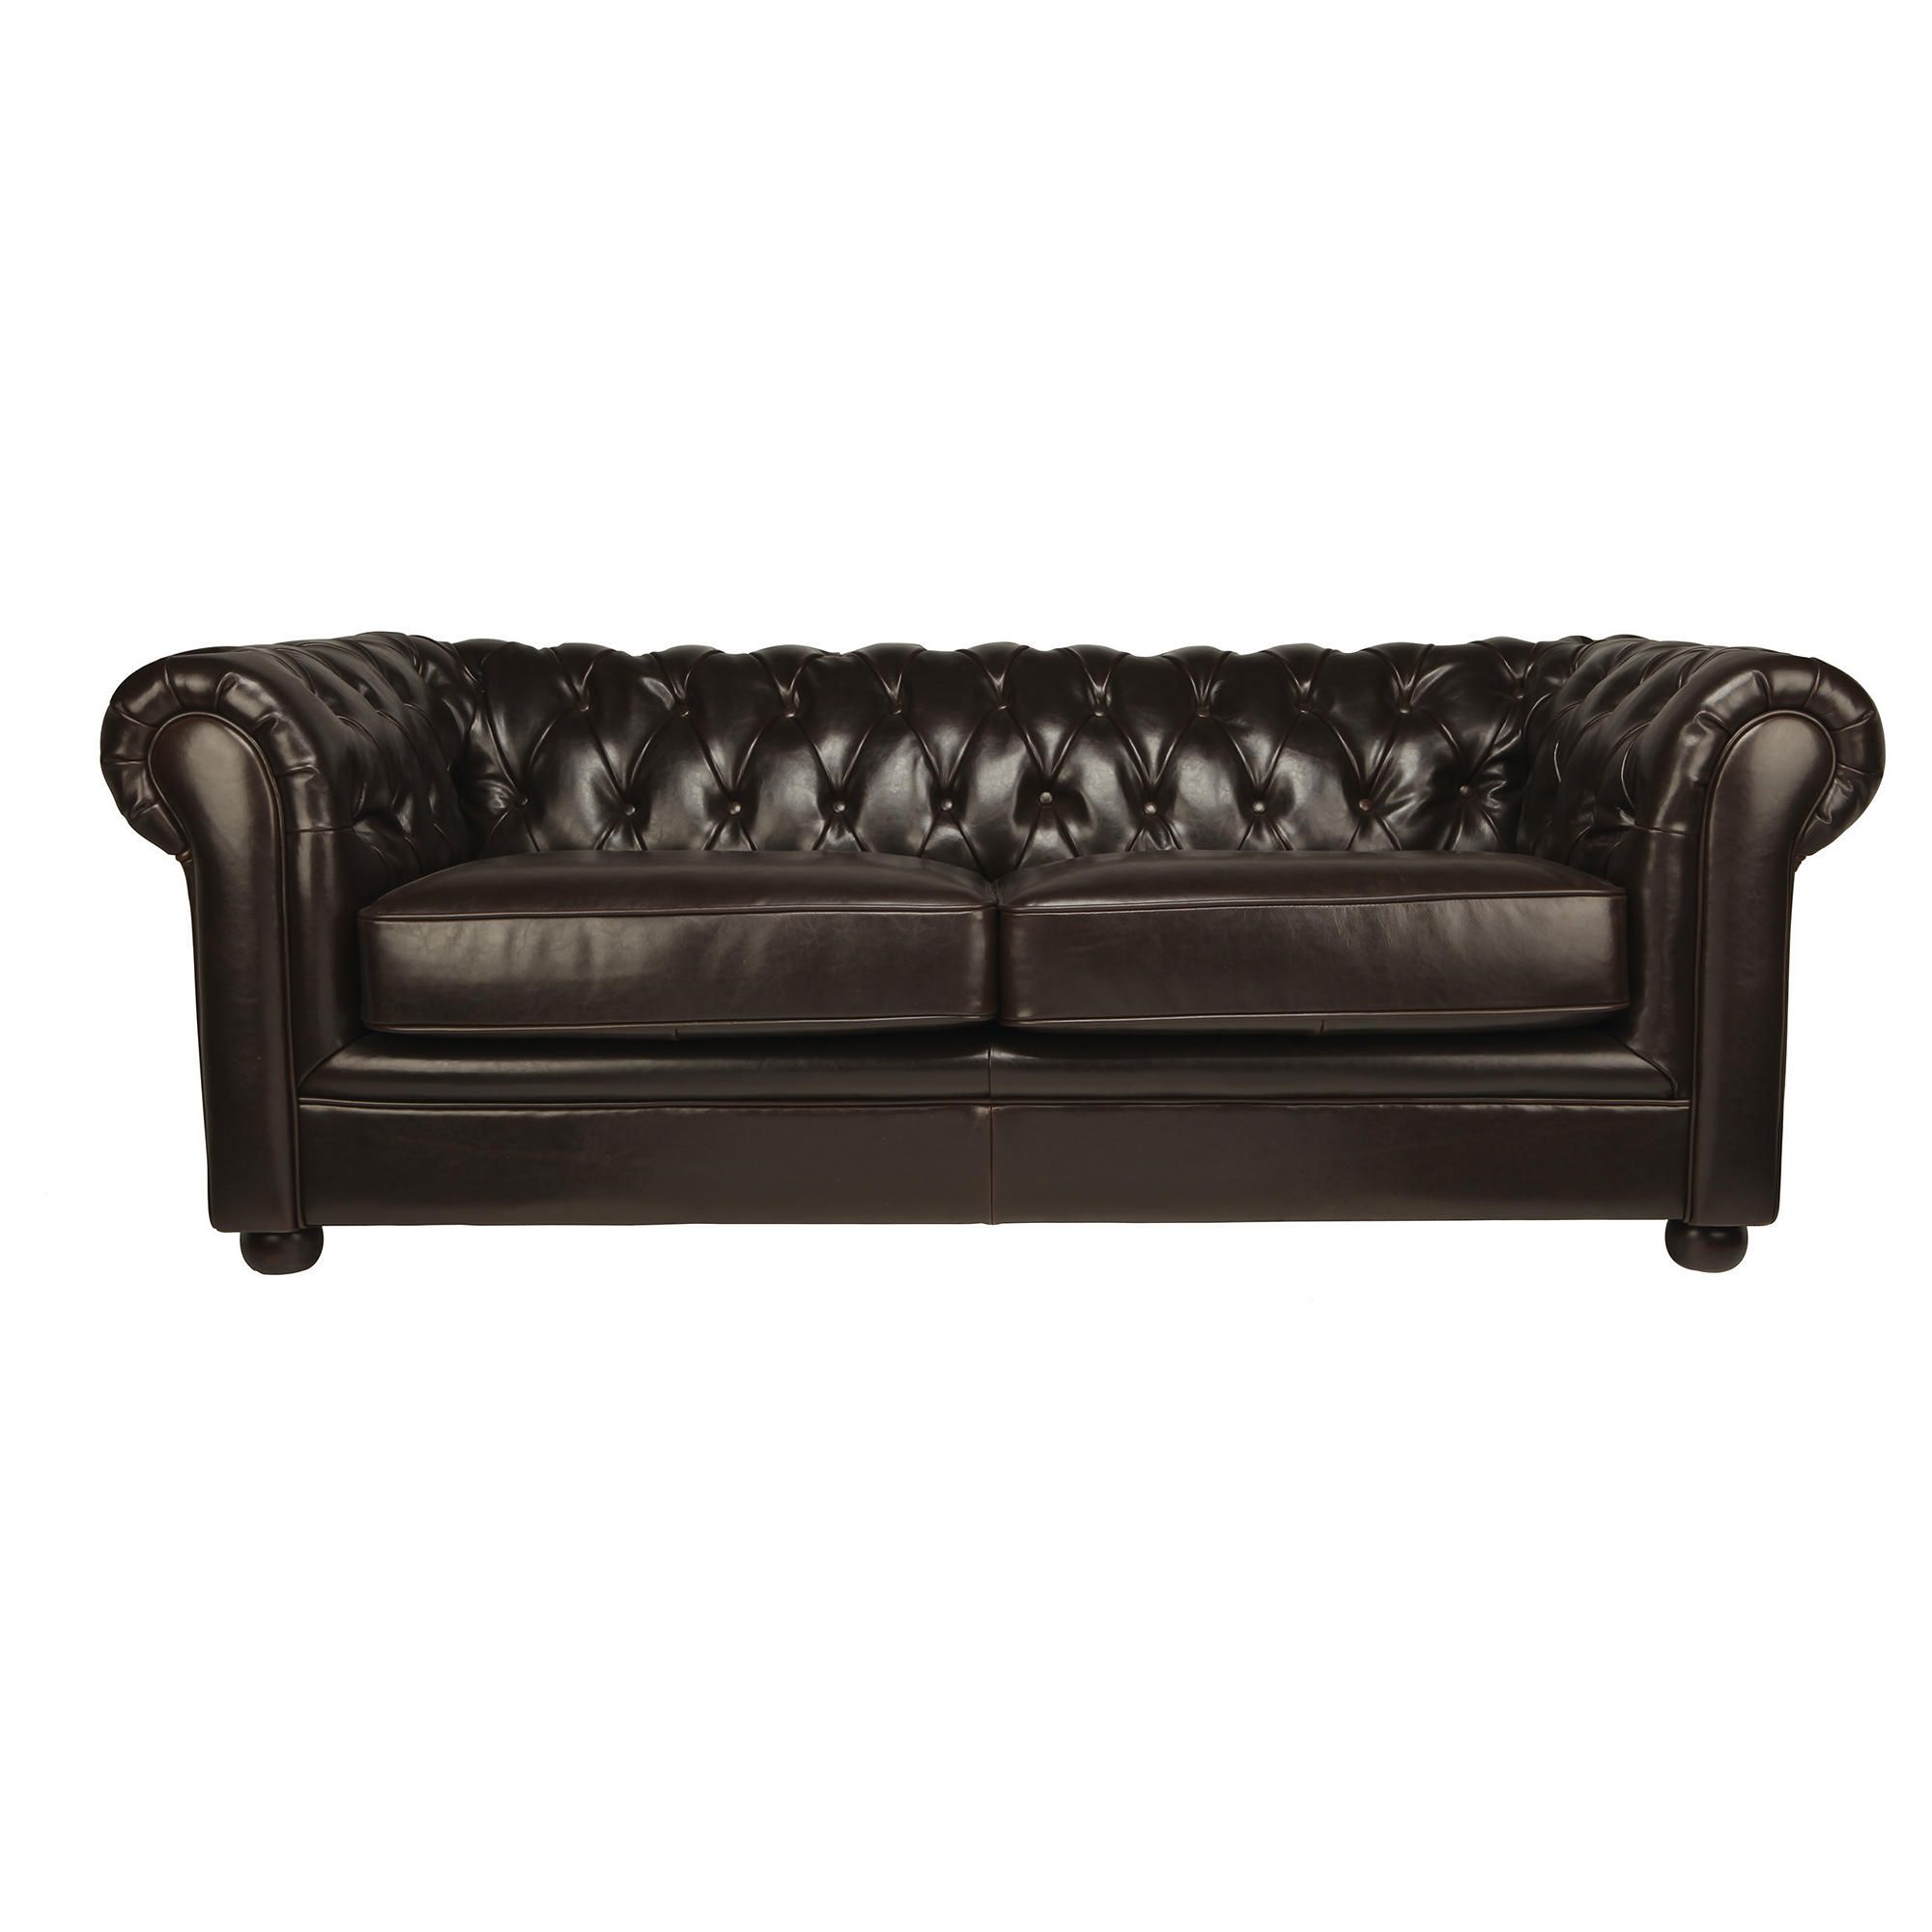 Chesterfield Large Leather Sofa, Brown at Tesco Direct